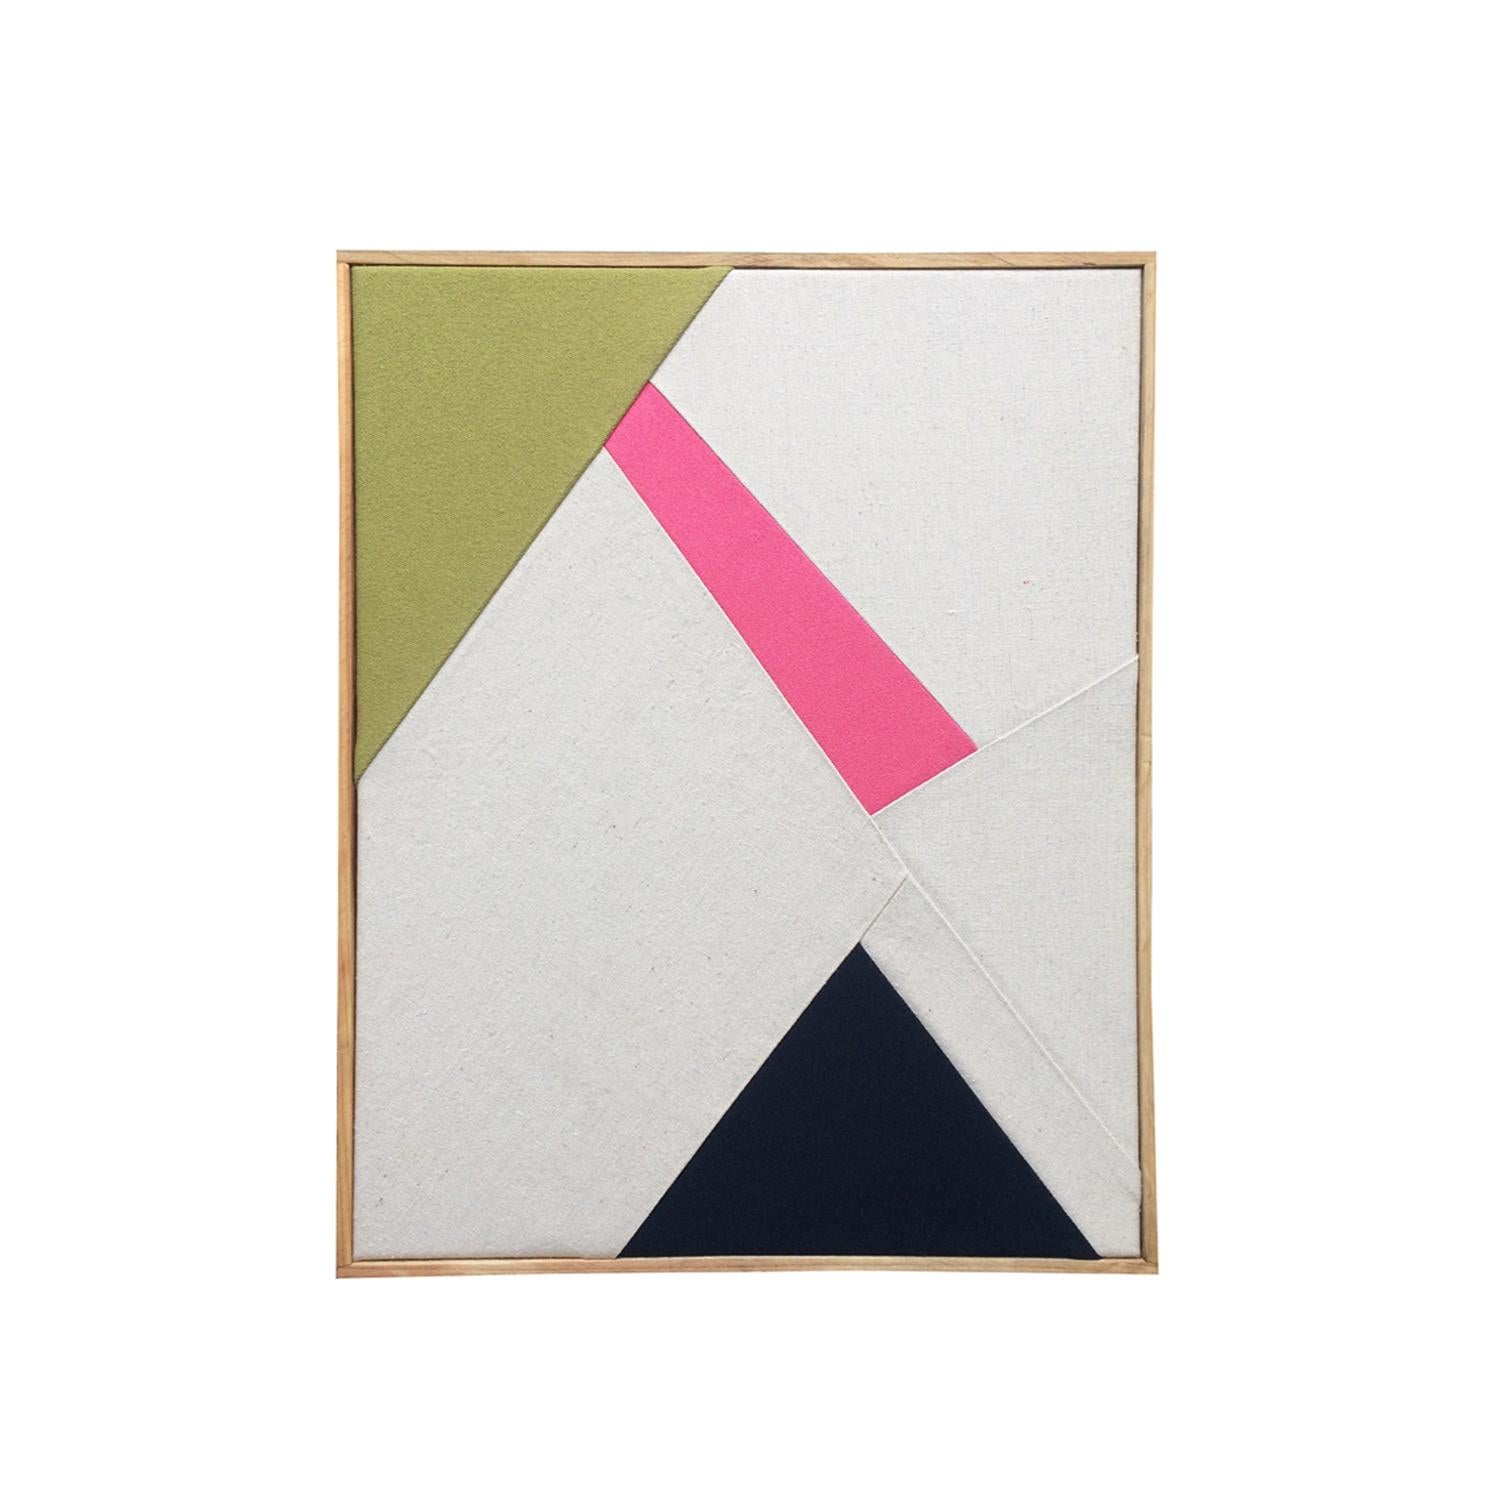 Sunray (textile art black and white pink moss green fabric abstract geometric) - Mixed Media Art by Meike Legler